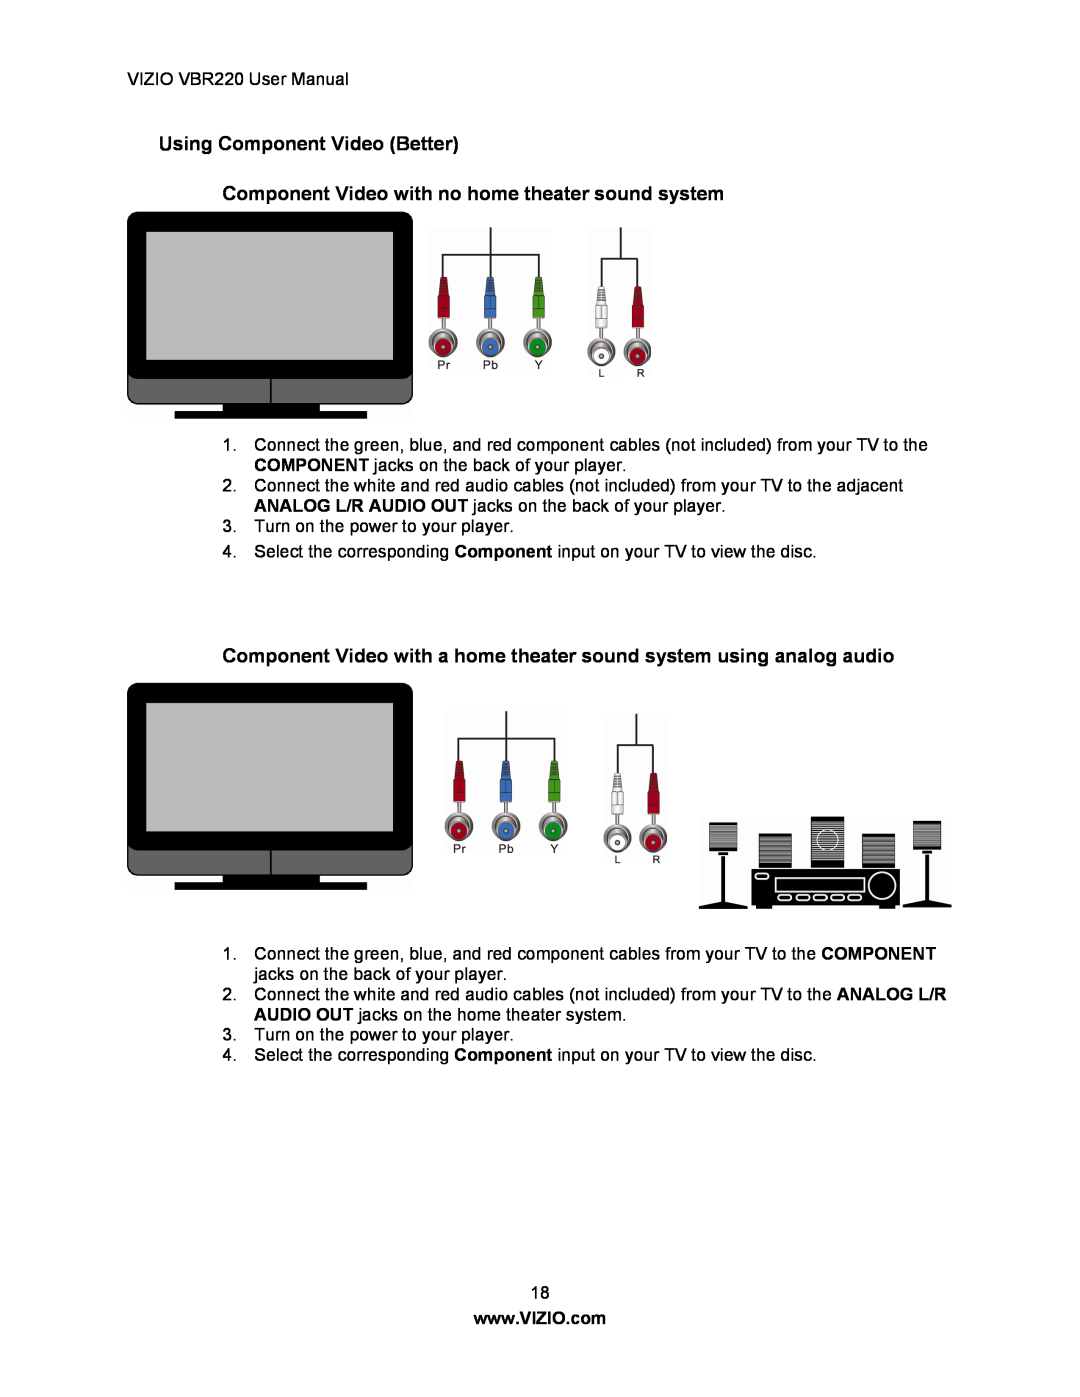 Panasonic VBR220 user manual Using Component Video Better, Component Video with no home theater sound system 